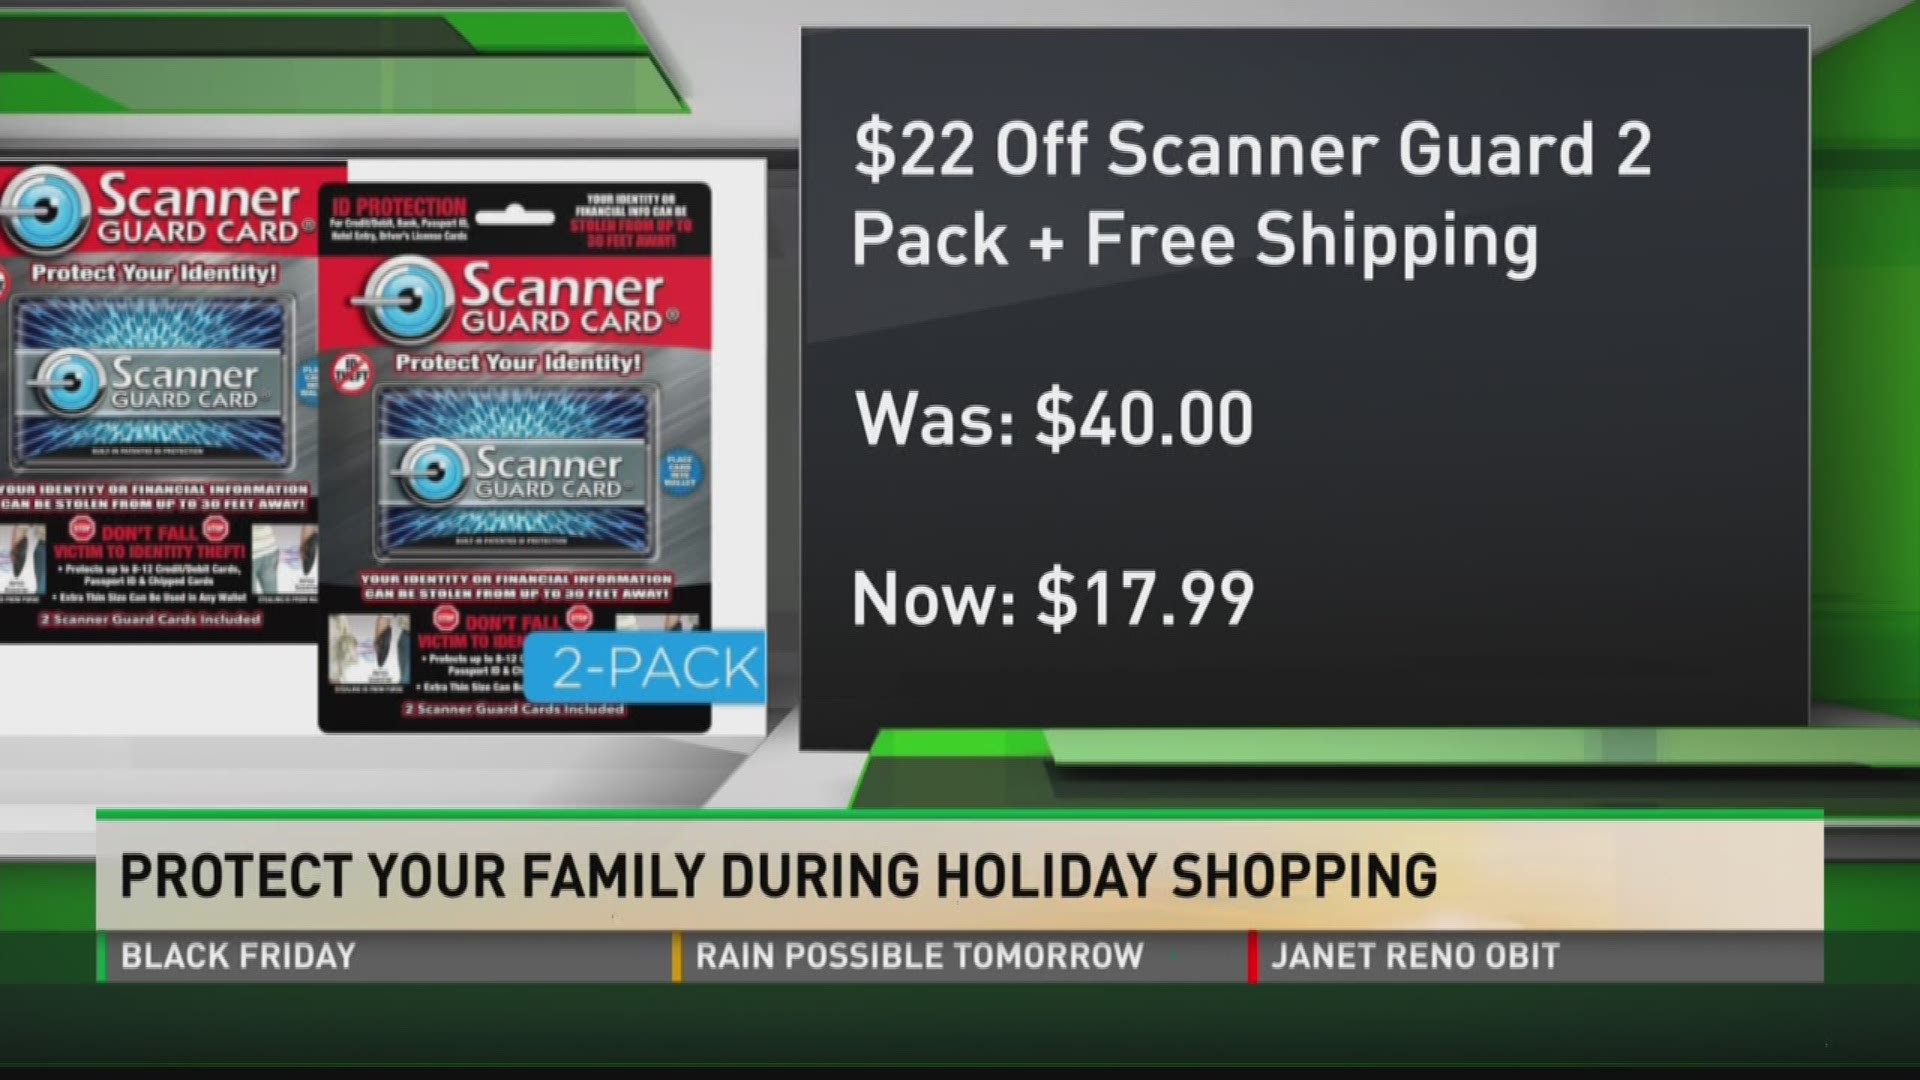 Money man Matt Granite shows how to protect your family during holiday shopping.